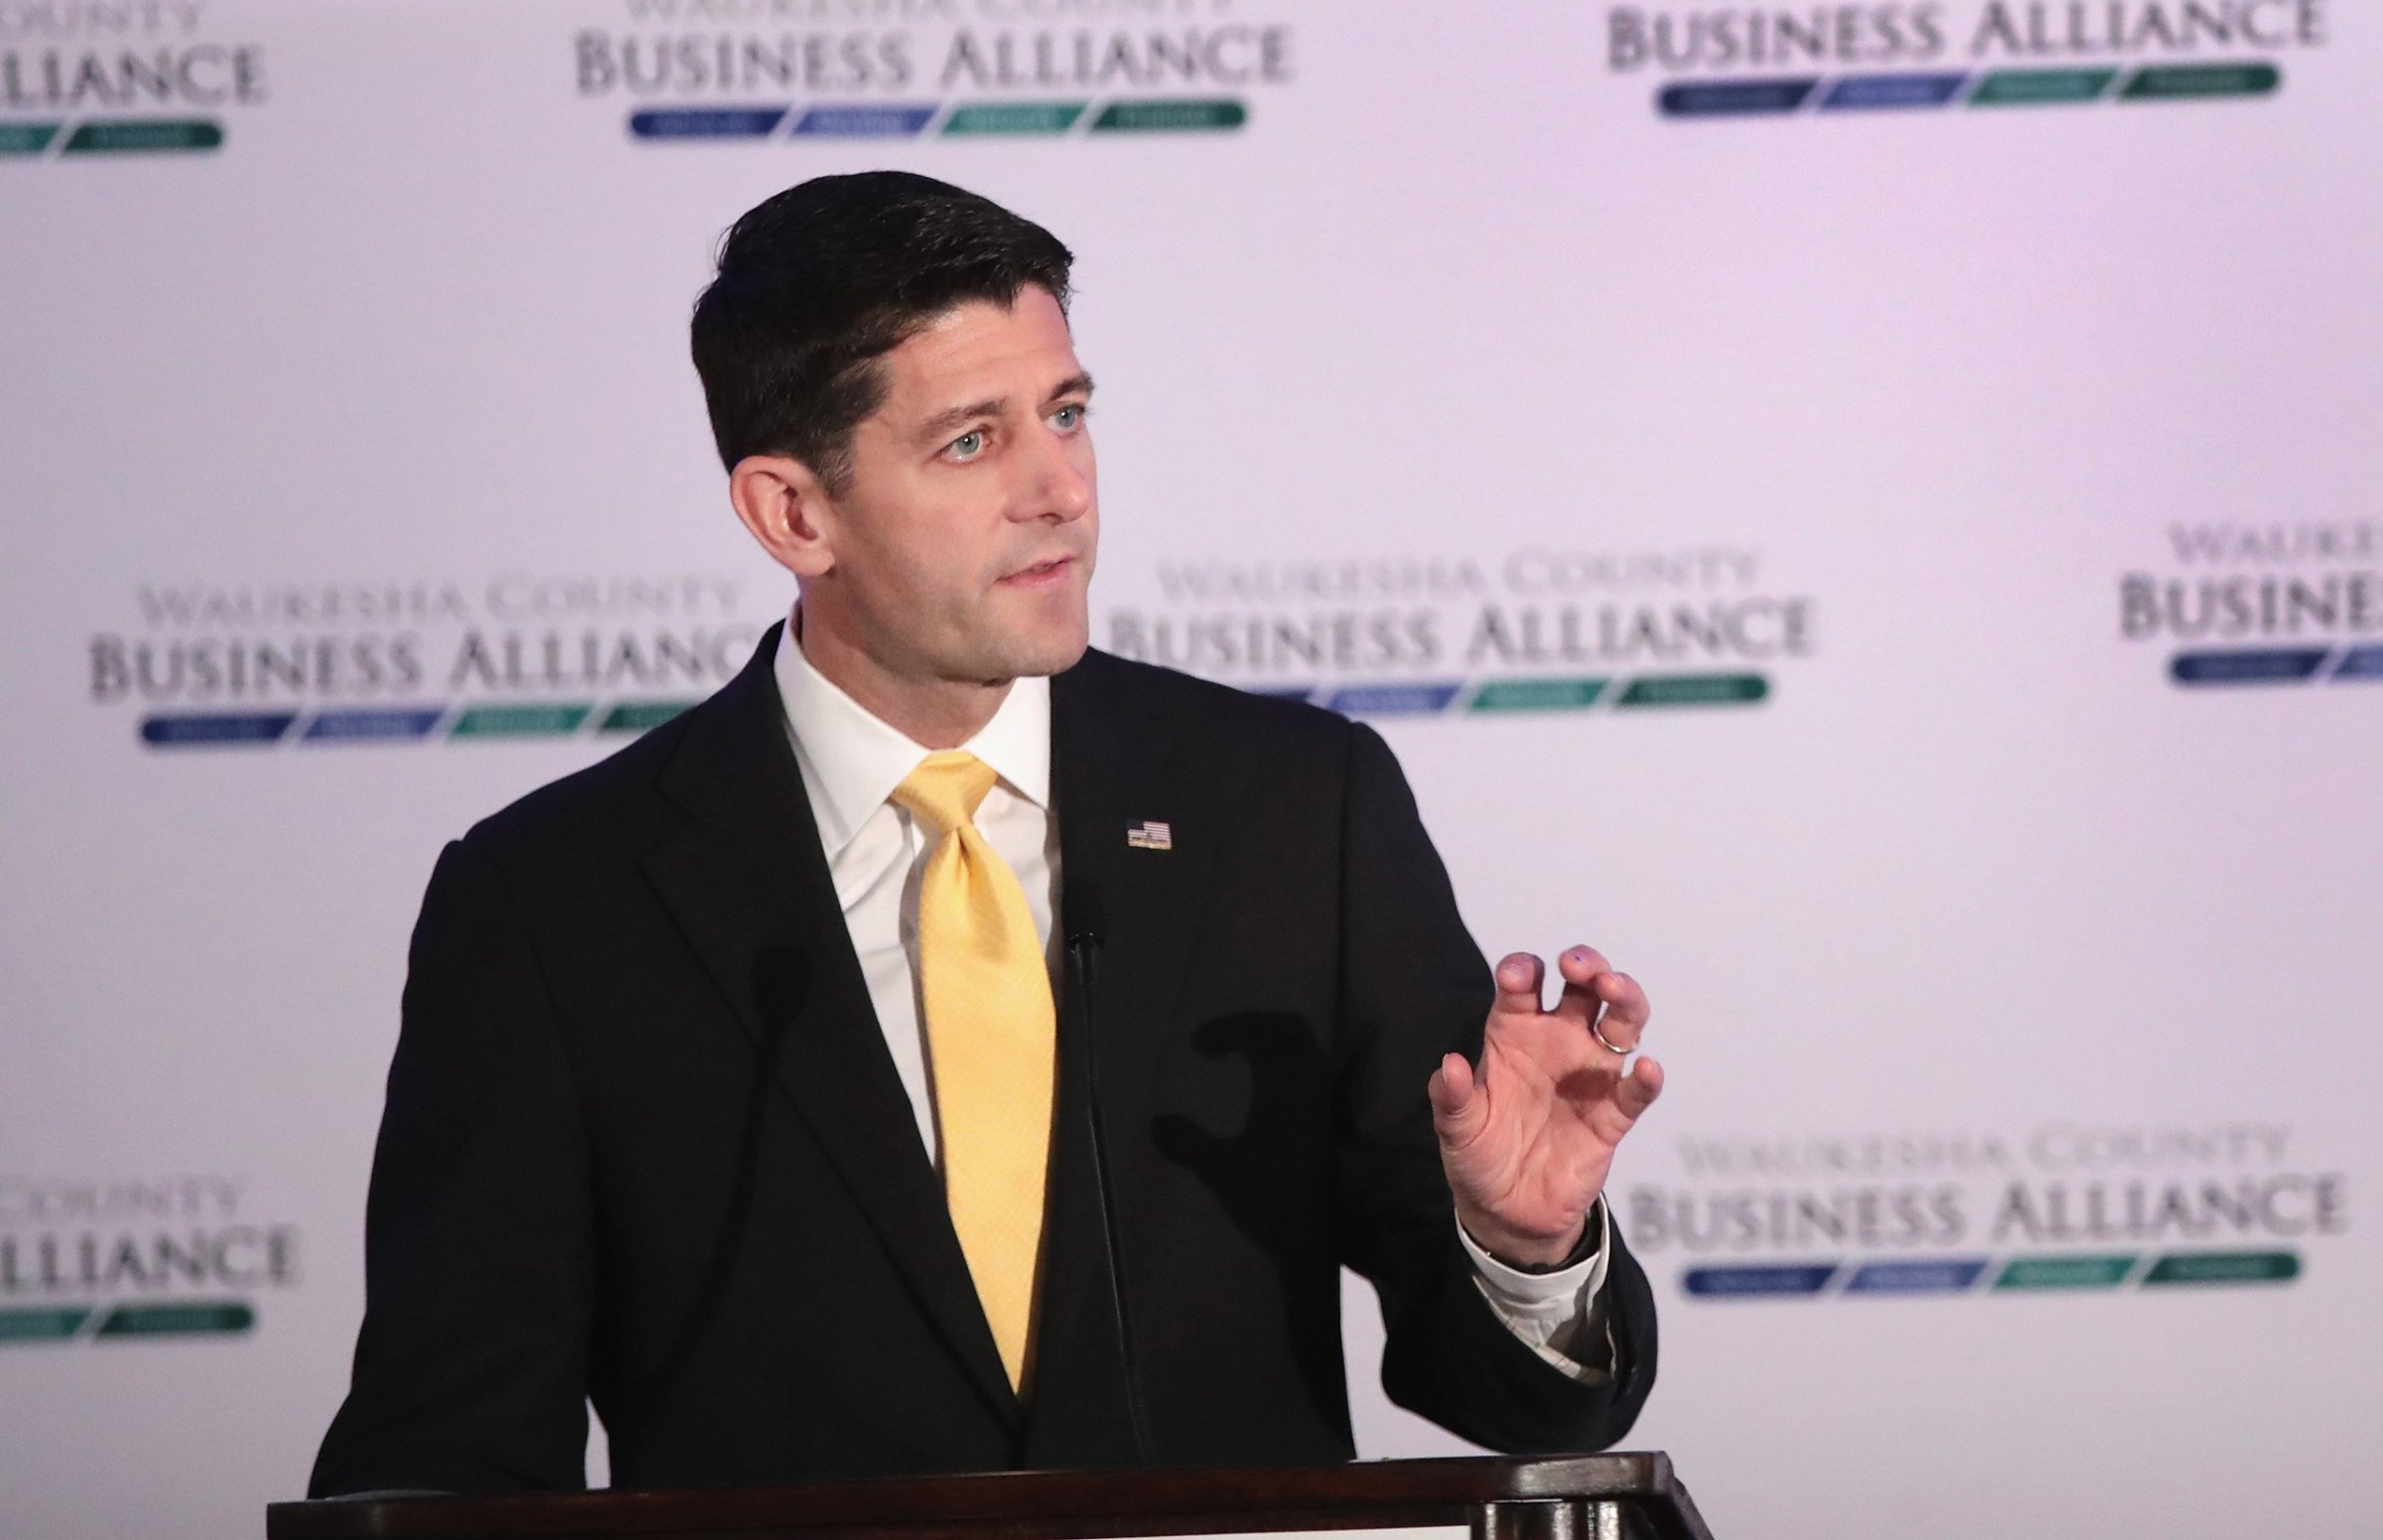 BROOKFIELD, WI - OCTOBER 13: Speaker of the House Paul Ryan (R-WI) speaks with business and community leaders at the Waukesha County Business Alliance luncheon on October 13, 2016 in Brookfield, Wisconsin. Although the event program stated that Ryan would take questions from the audience he left without taking any. Ryan recently told his colleagues in the House that he would no longer defend or campaign for Donald Trump, the Republican nominee for president. (Photo by Scott Olson/Getty Images)